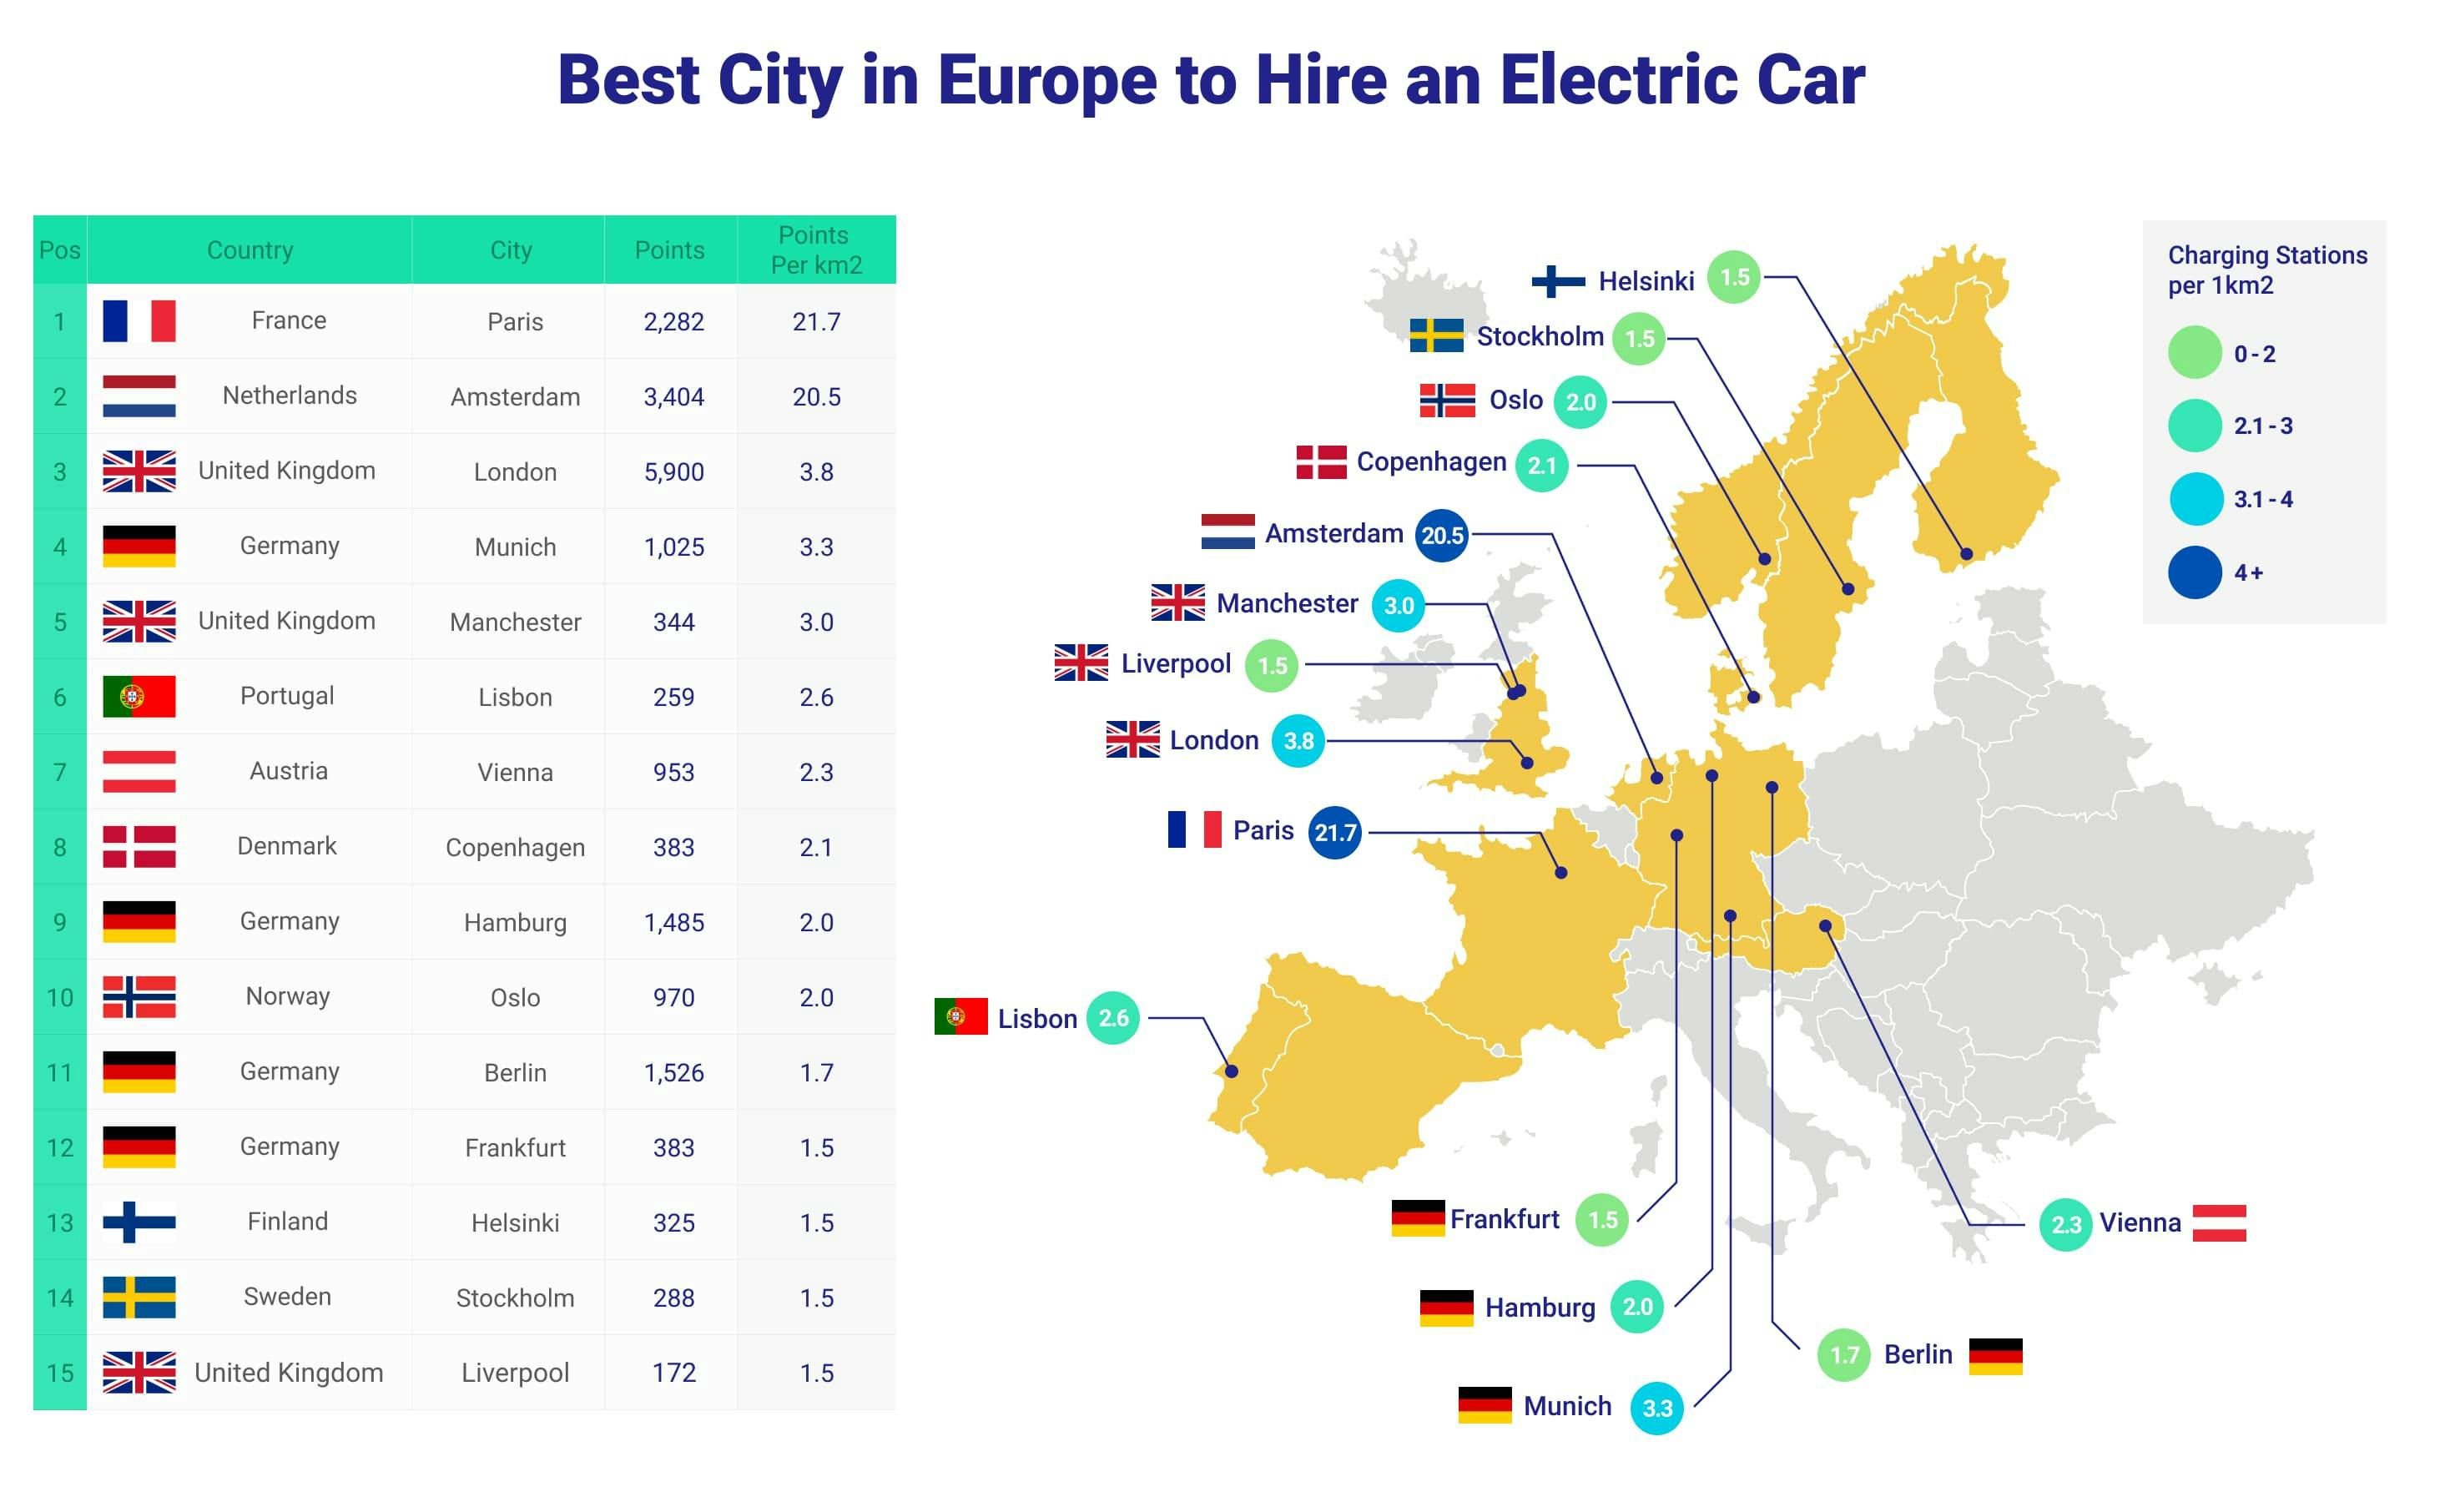 Best European cities for EVs by charging point density